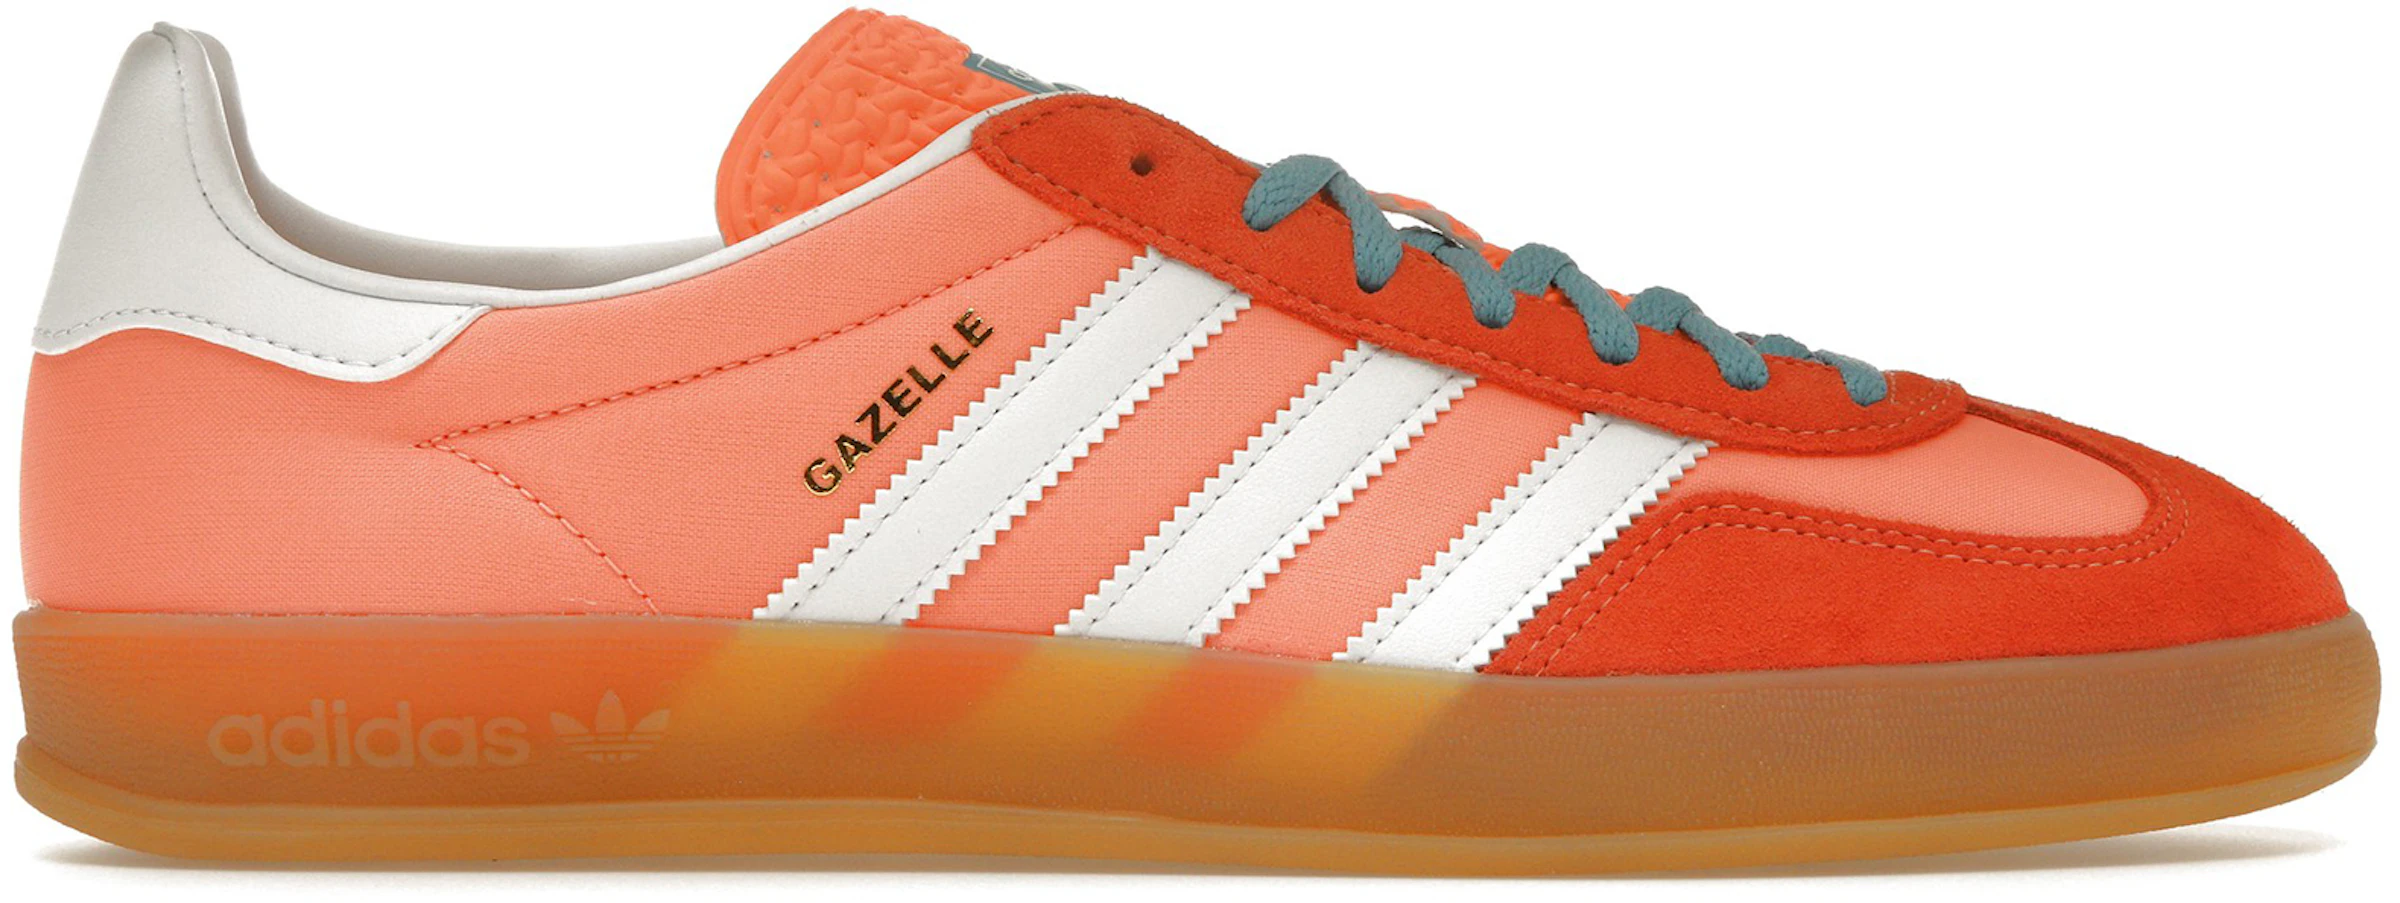 adidas Gazelle Shoes & New Sneakers - StockX